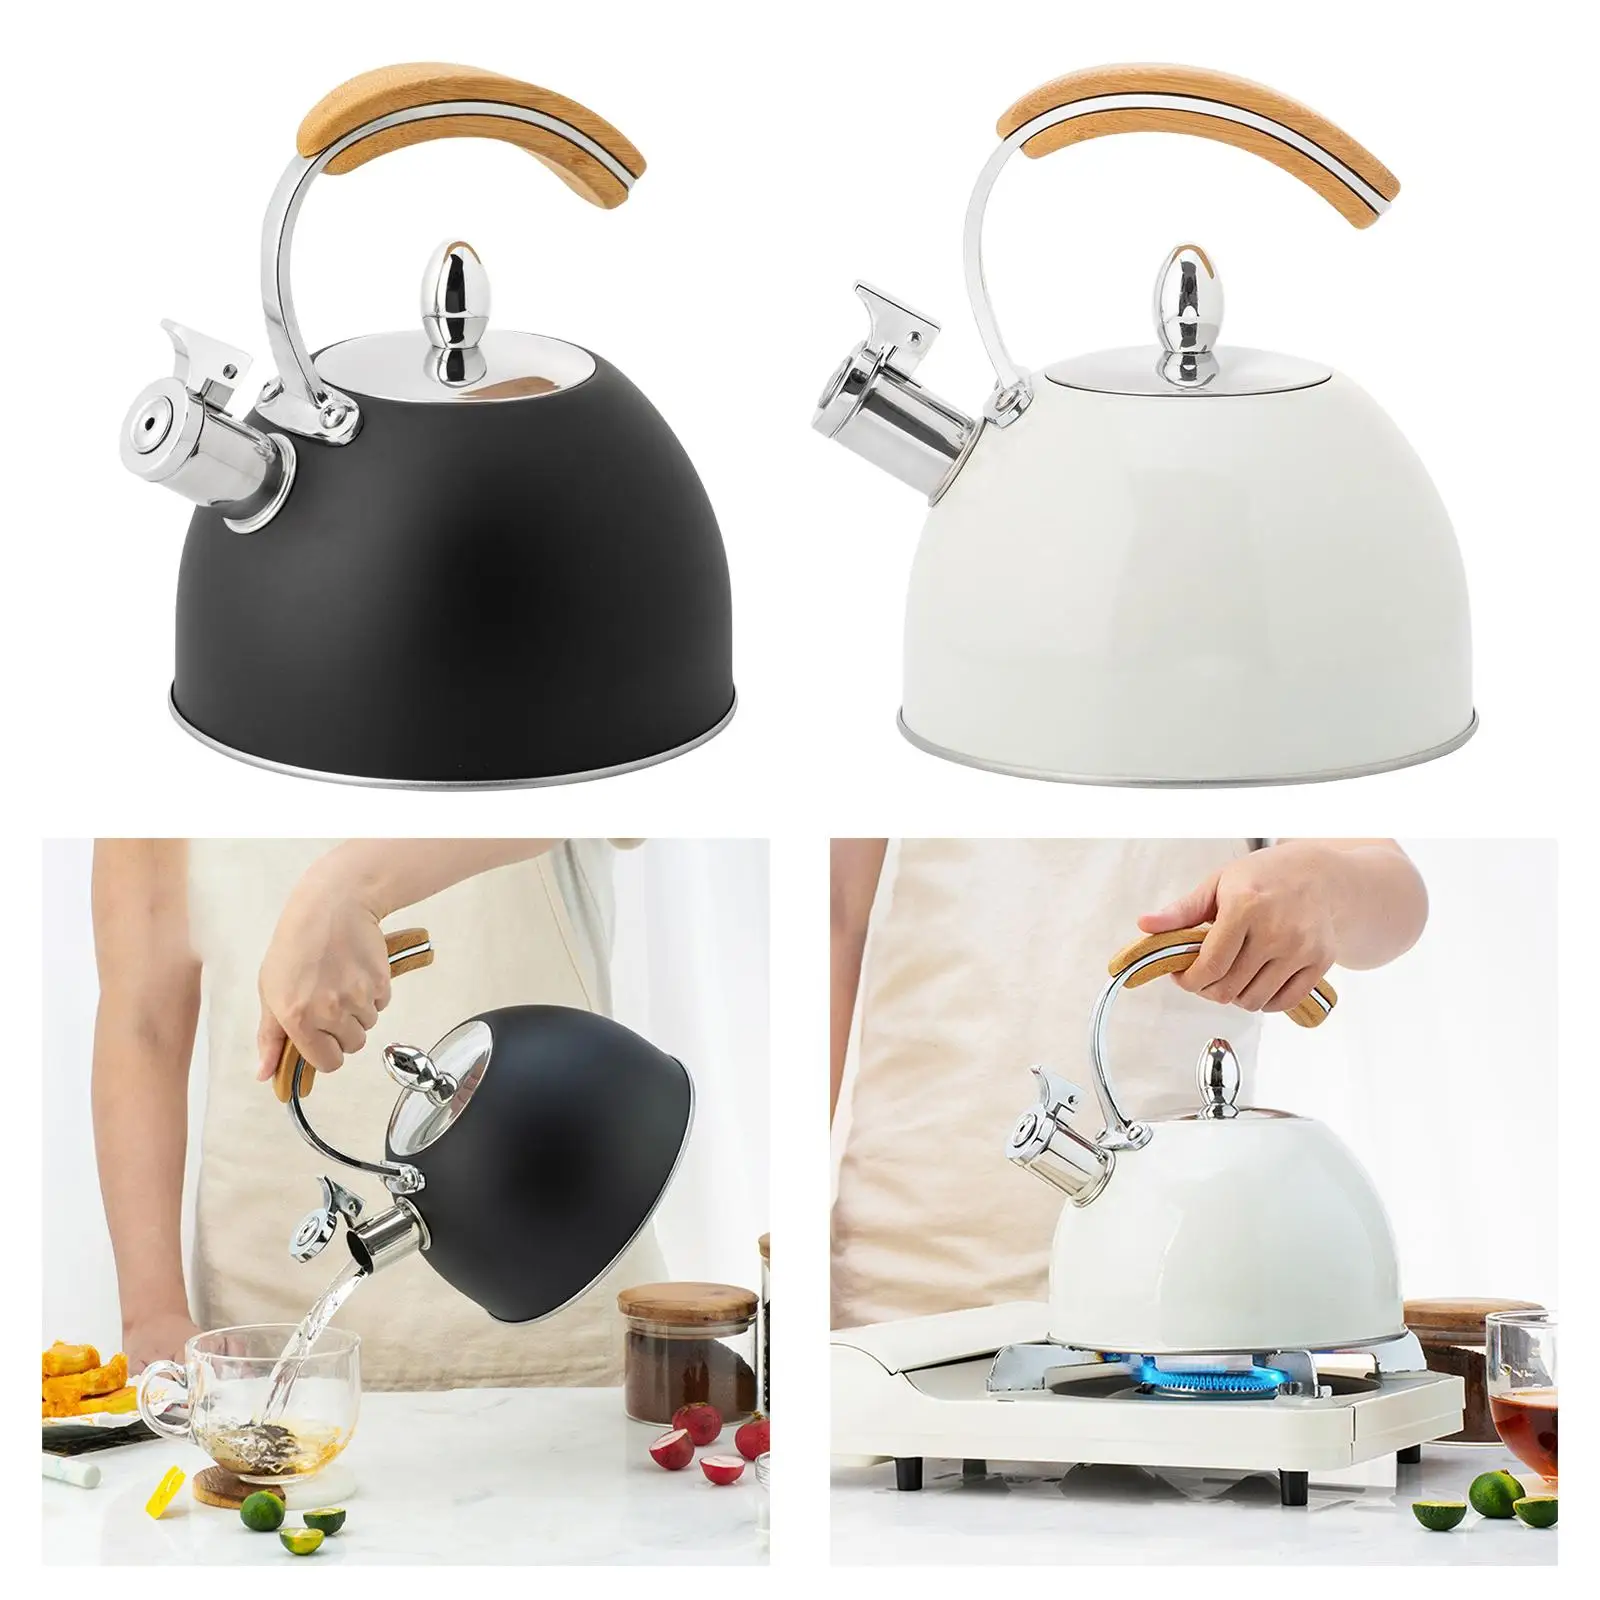 Whistling Tea Kettle 3L Stovetop Stainless Steel Teapot with Loud Whistle, Anti-Rust and Anti-Heat Handle